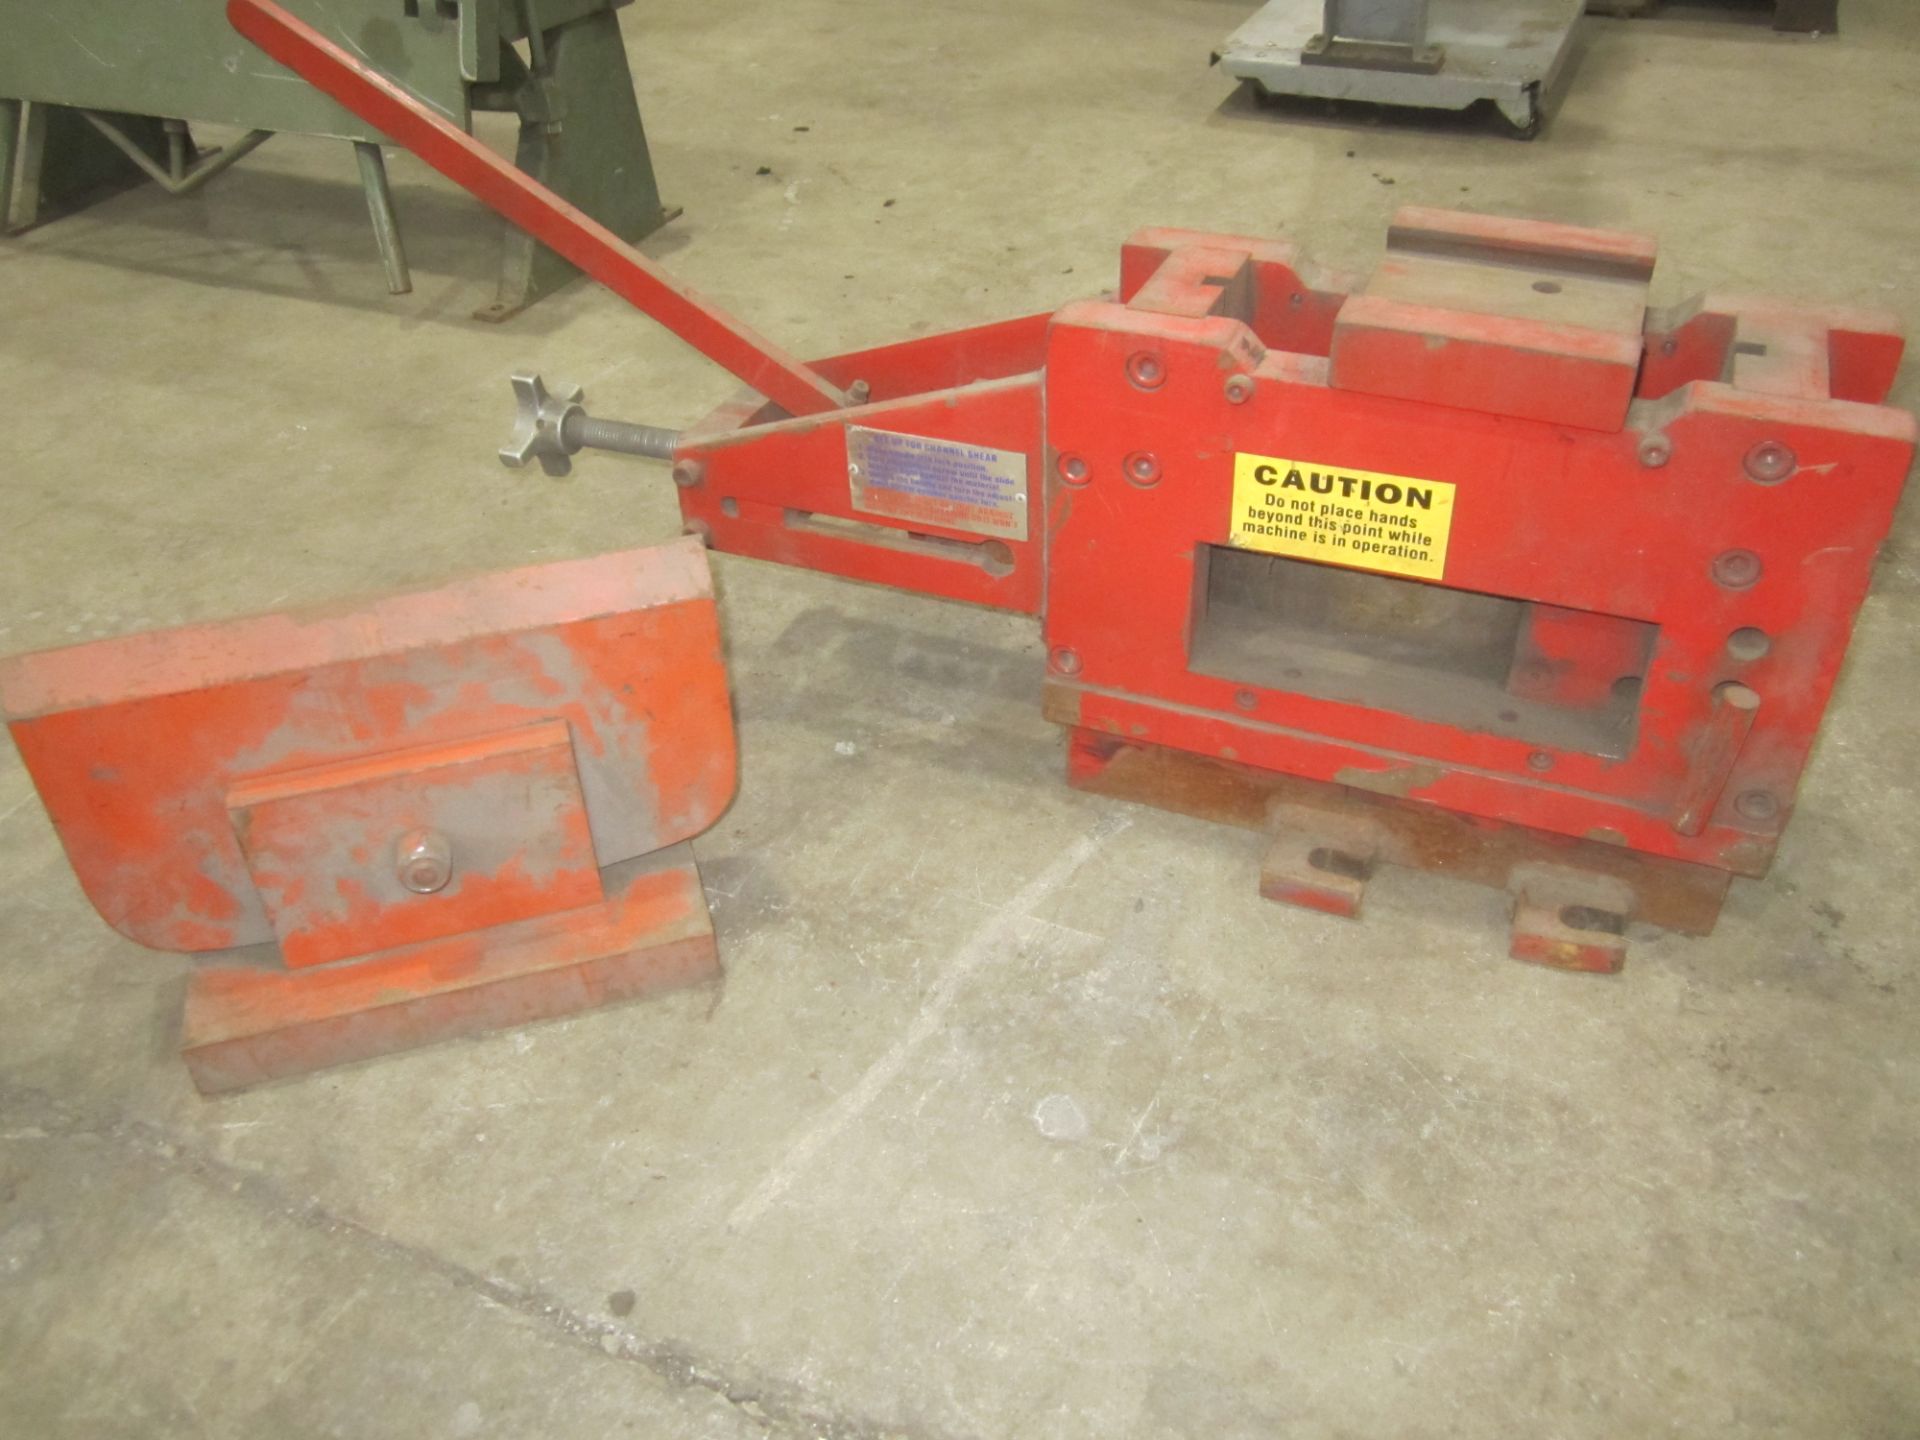 Channel Iron Shear and 12" Bending Punch Attachment for an Ironworker